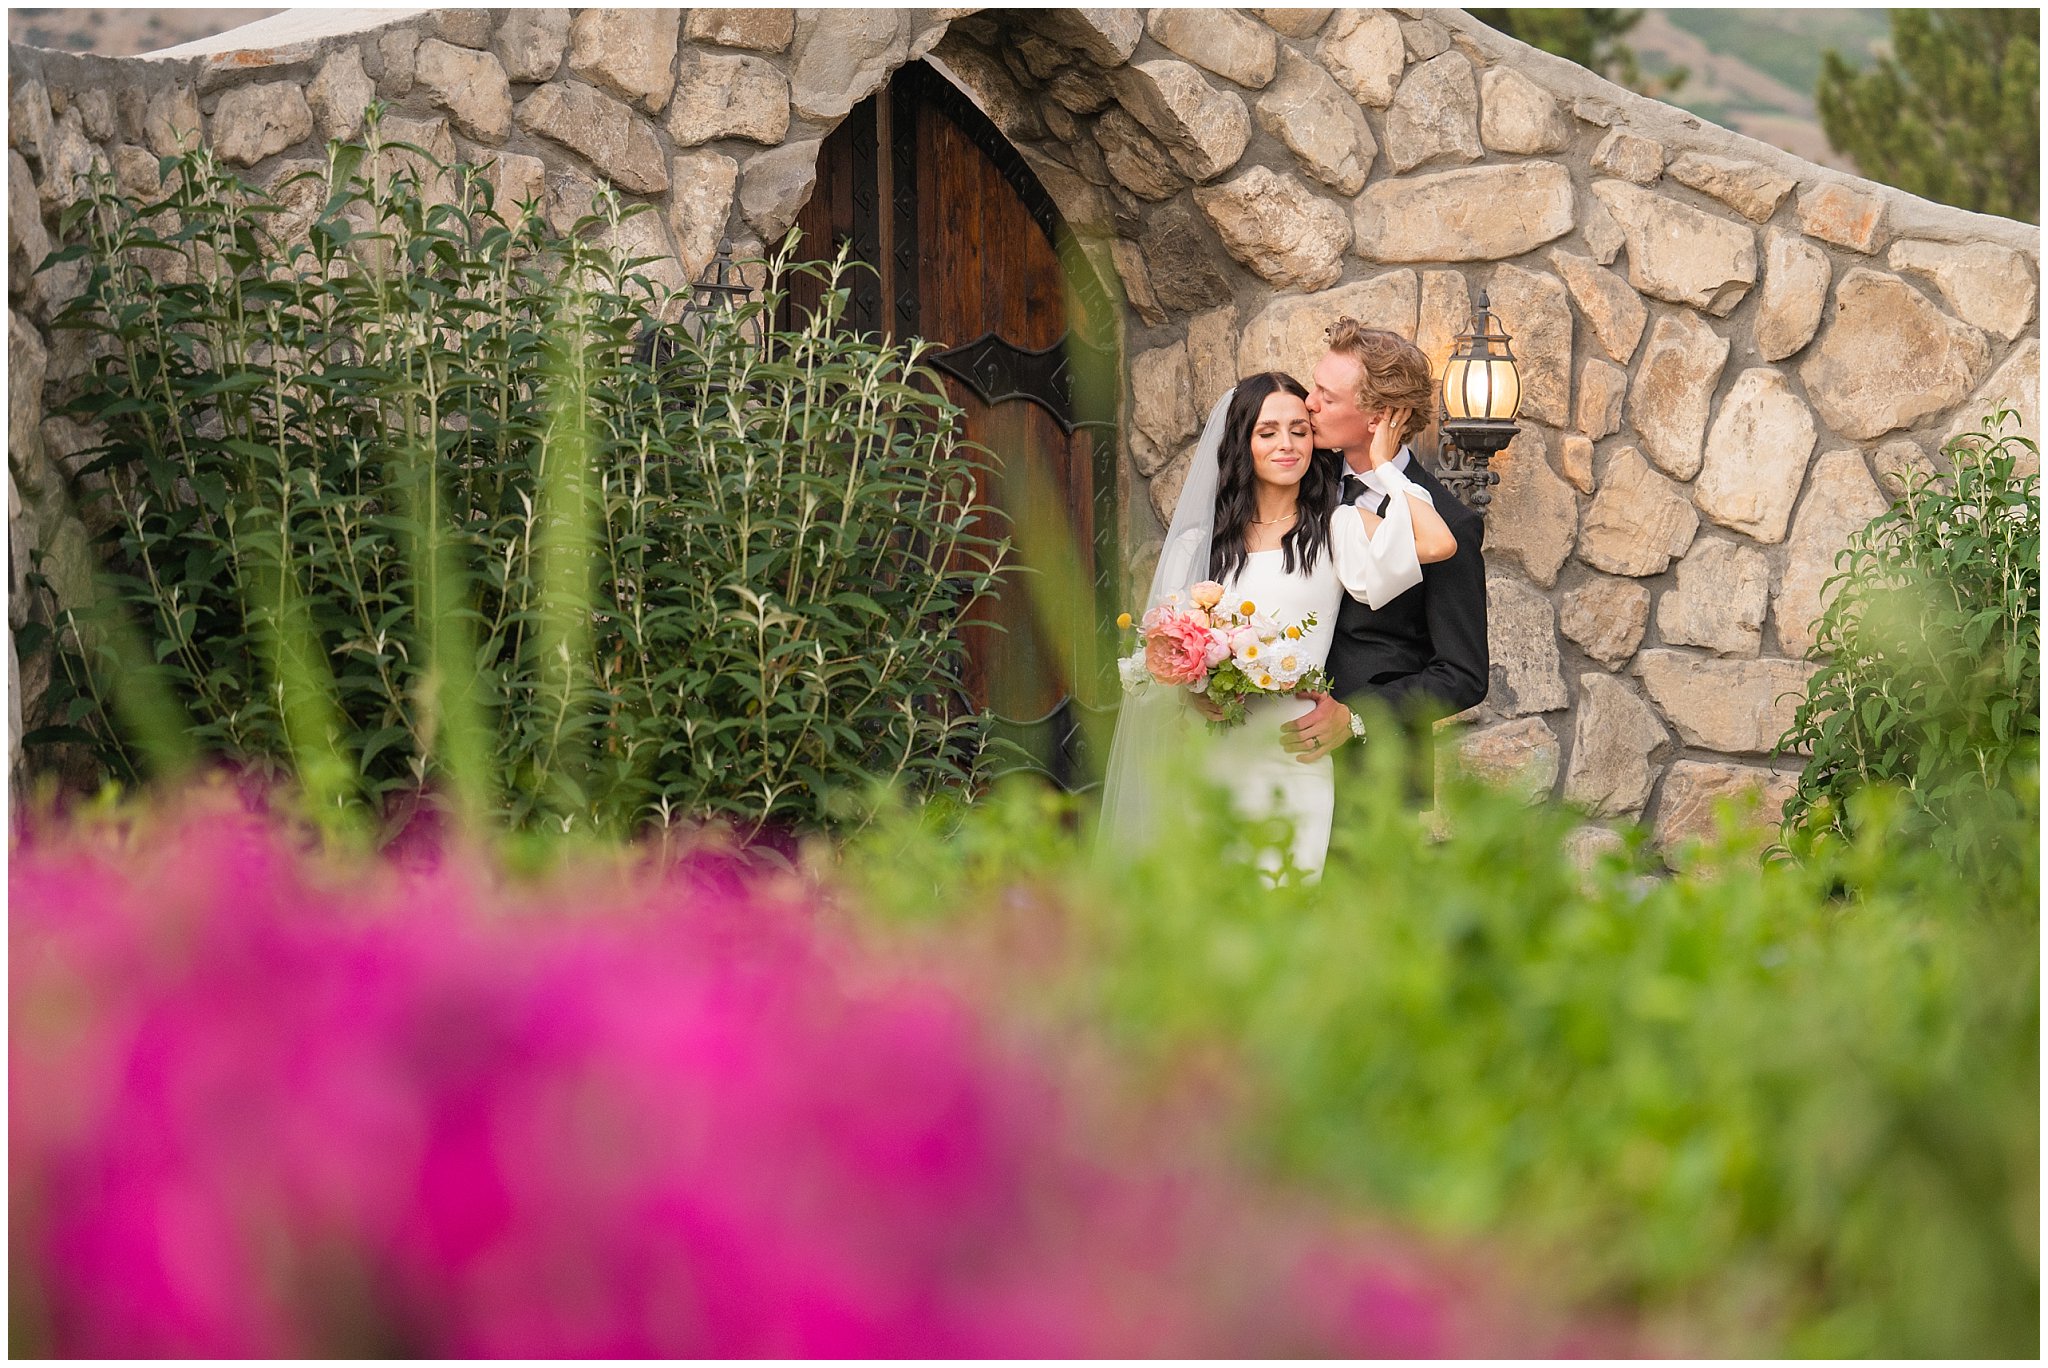 Bride and groom portraits outside of castle wedding venue with black and white and pink wedding colors | Draper Temple and Wadley Farms Summer Castle Wedding | Jessie and Dallin Photography